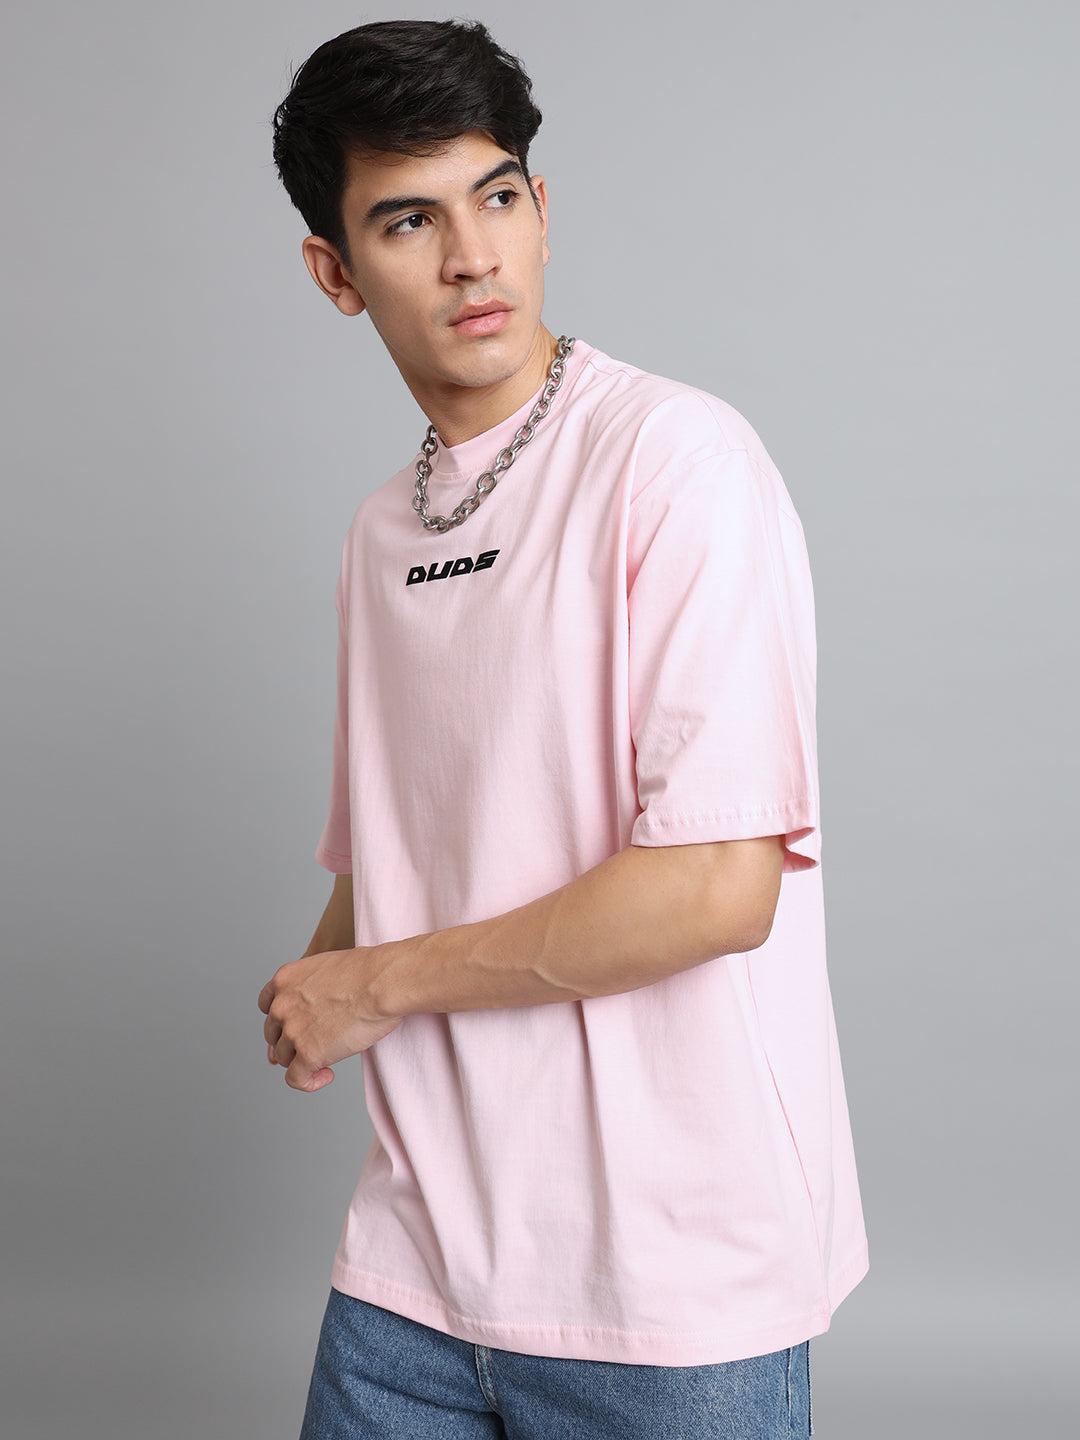 Top-Dog Over-Sized T-Shirt (Pink) - Wearduds